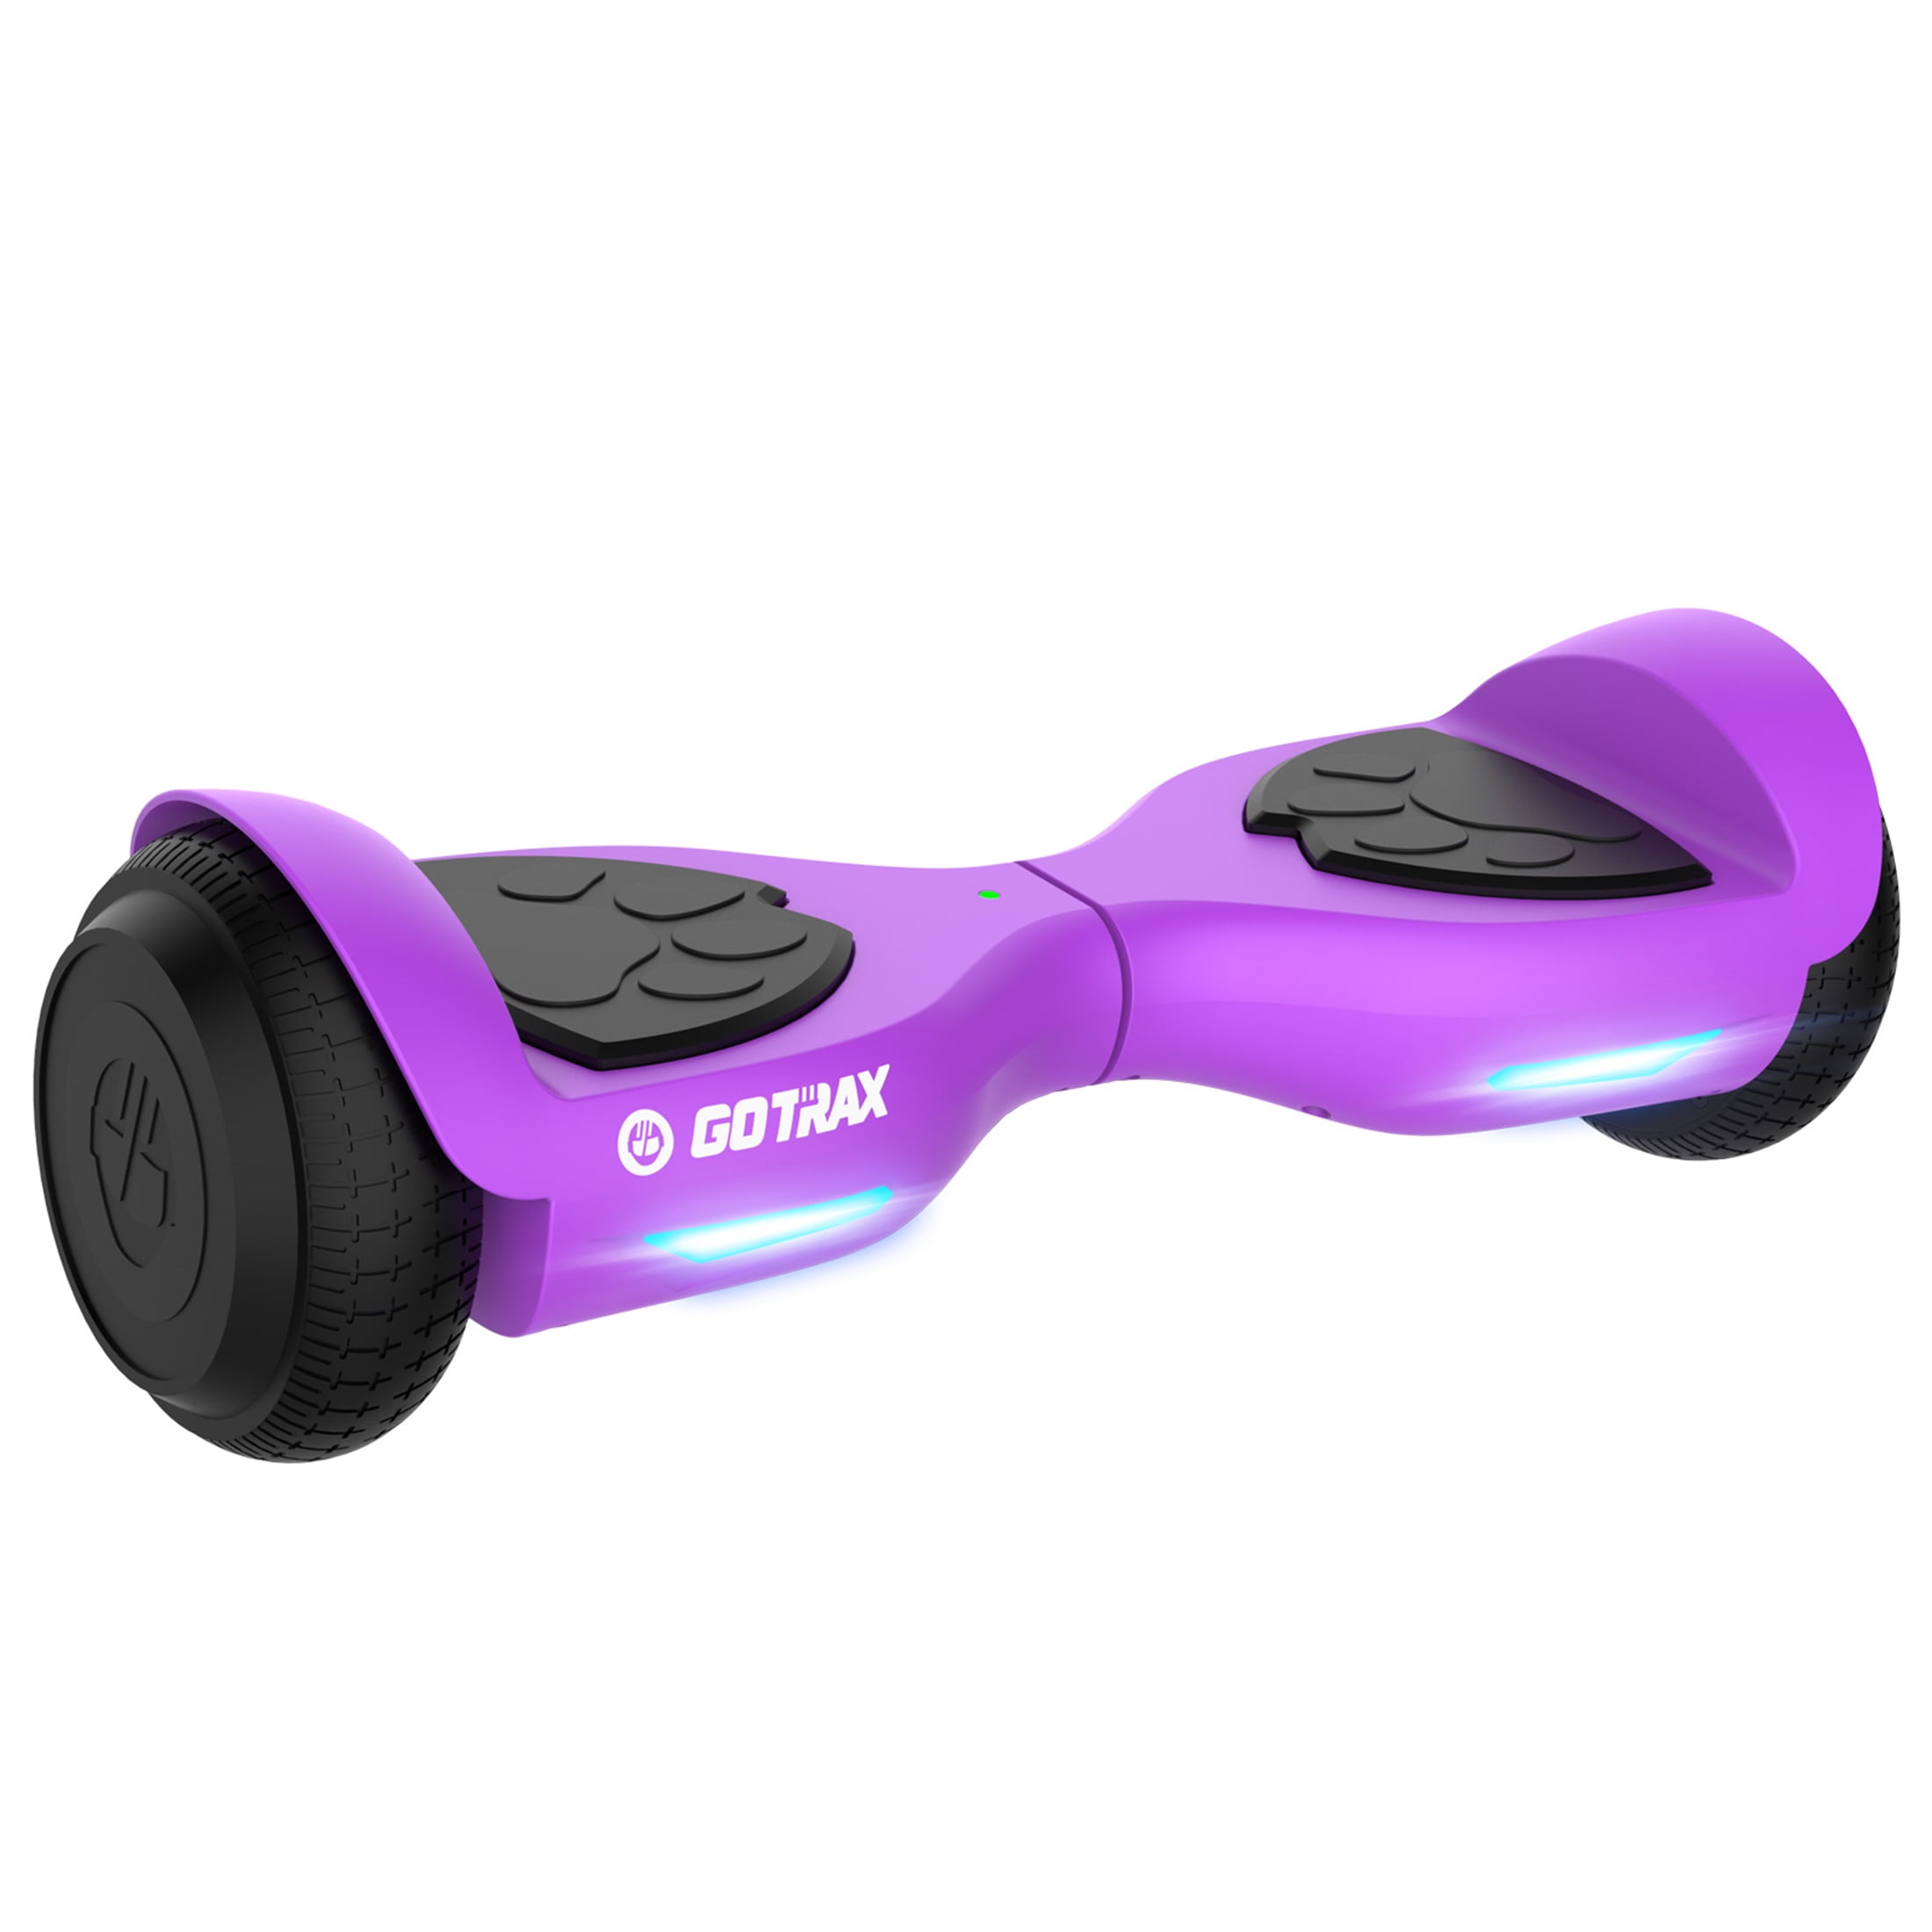 Gotrax Lil Cub Kids Hoverboard with 6.5" Wheels & LED Front Light, Max 2.5 Miles and 6.2mph Self Balancing Scooter for 44-88lbs Kids Purple